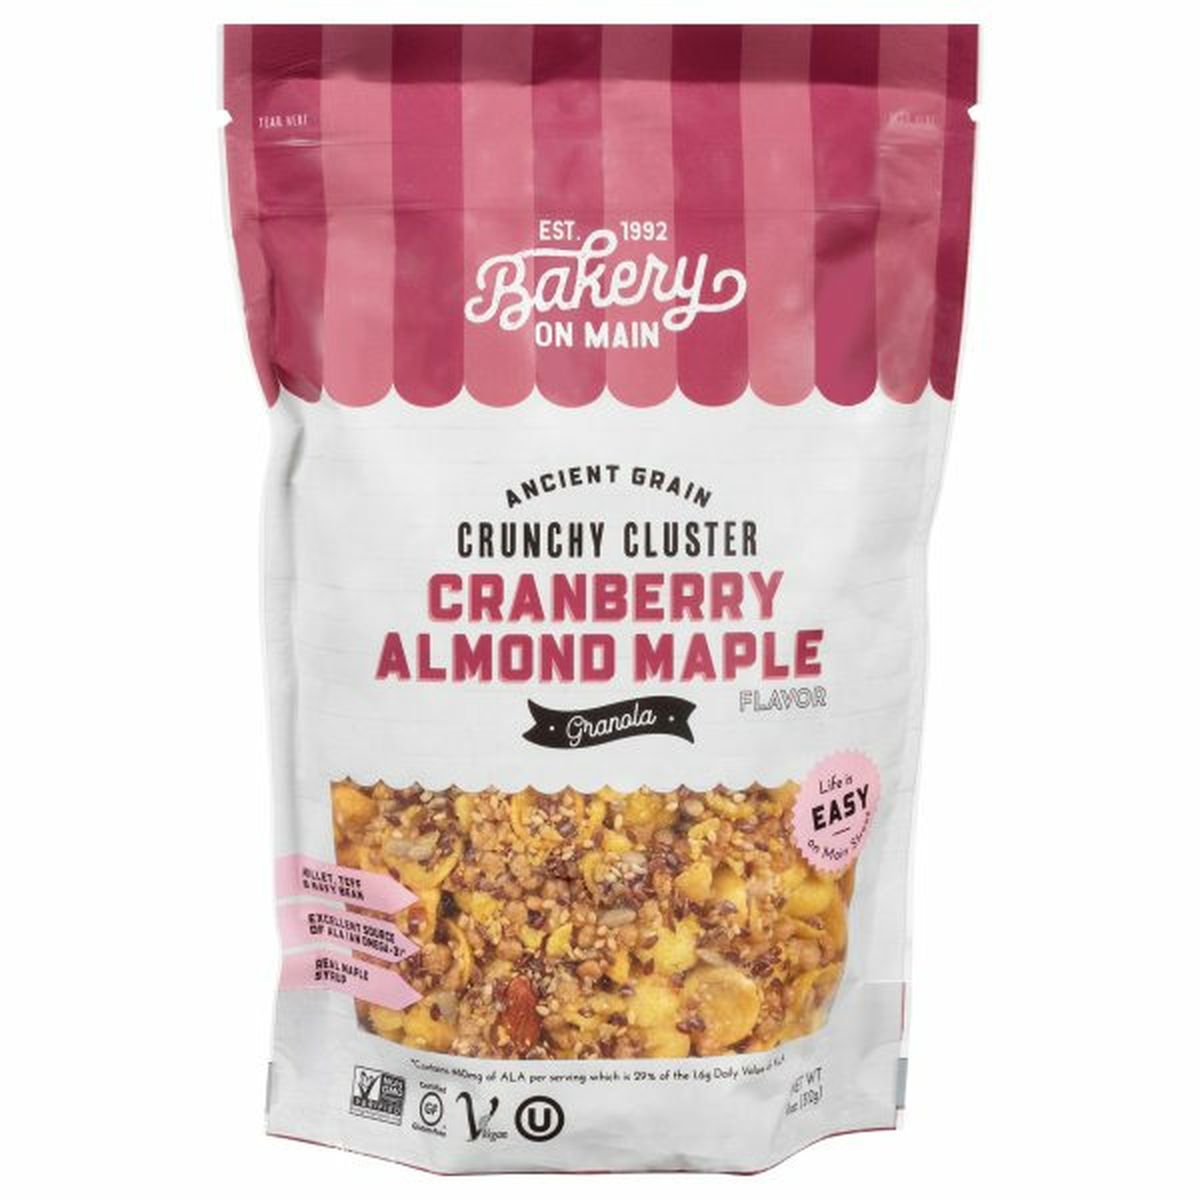 Calories in Bakery On Main Granola, Cranberry Almond Maple, Crunchy Cluster